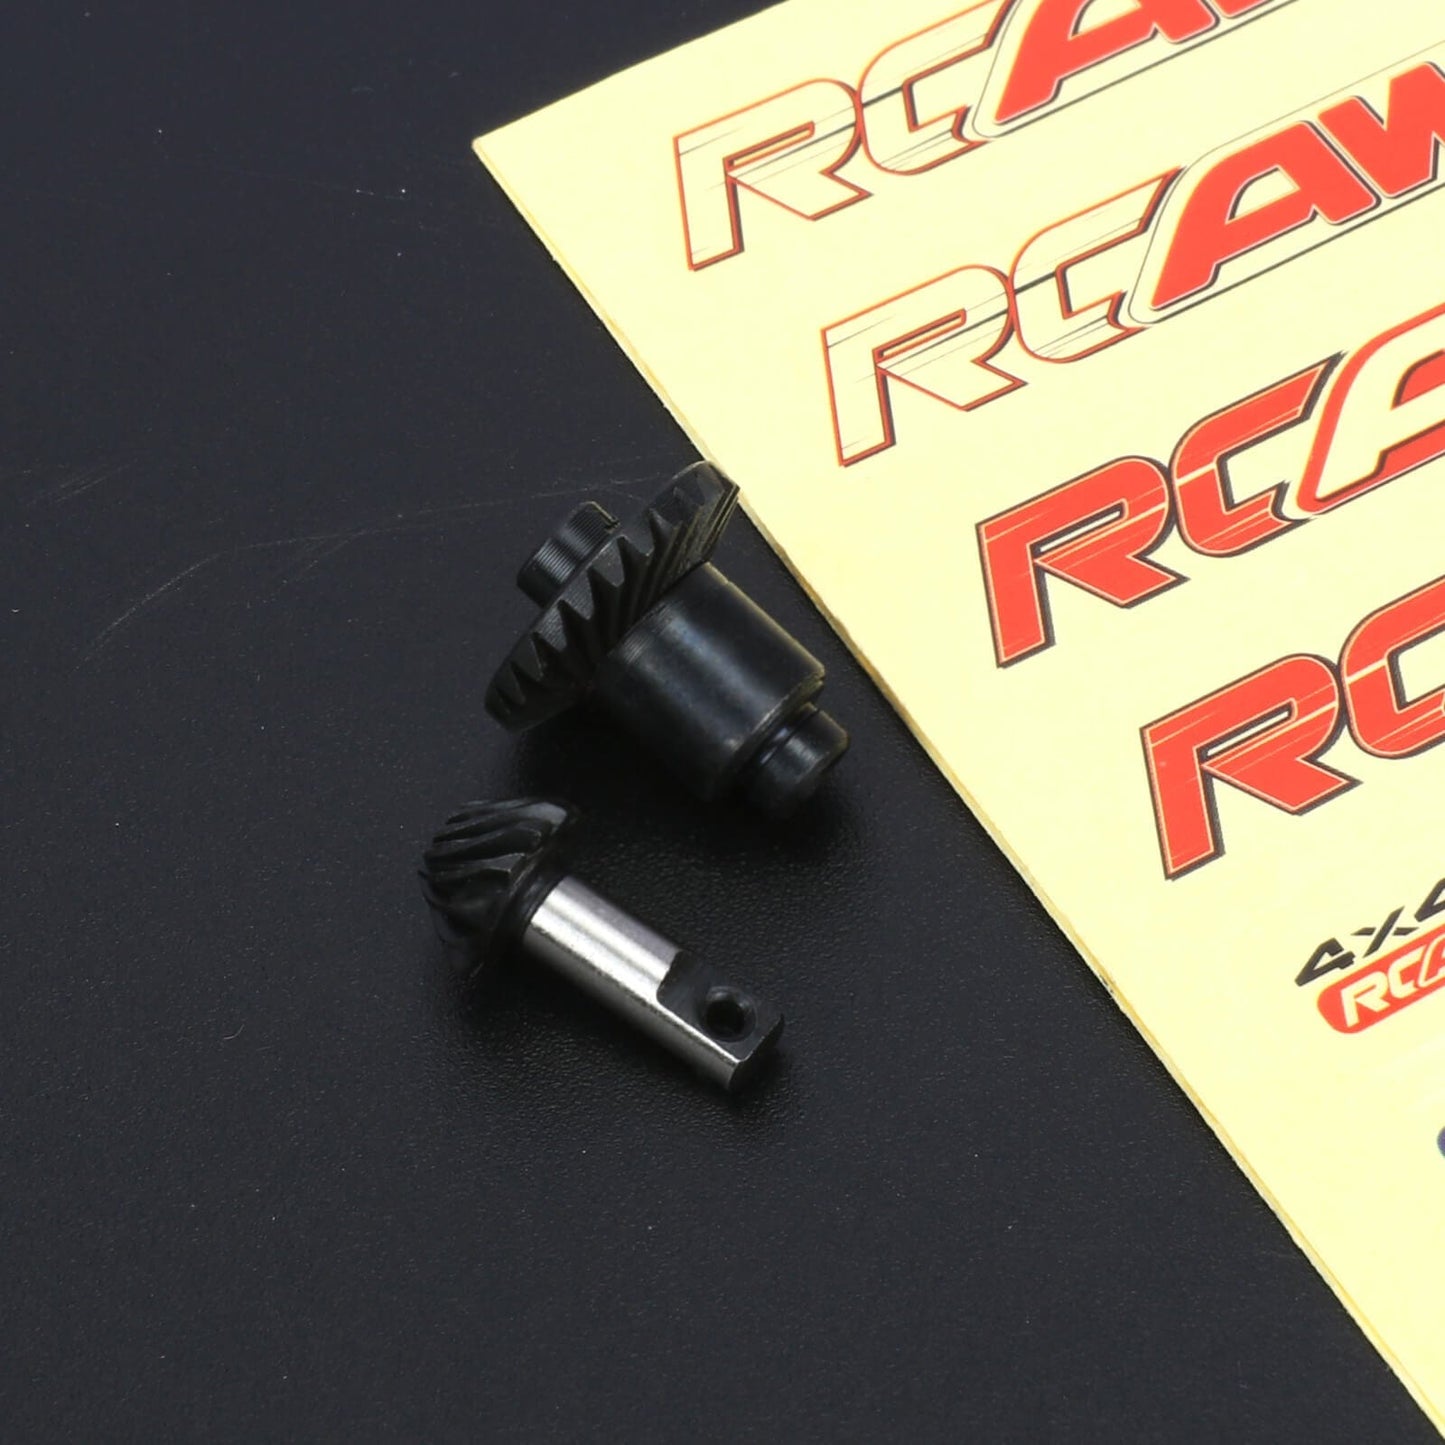 RCAWD 1set RCAWD 24T 12T Portal Axle Helical Gears Set for Trx4m Upgrades